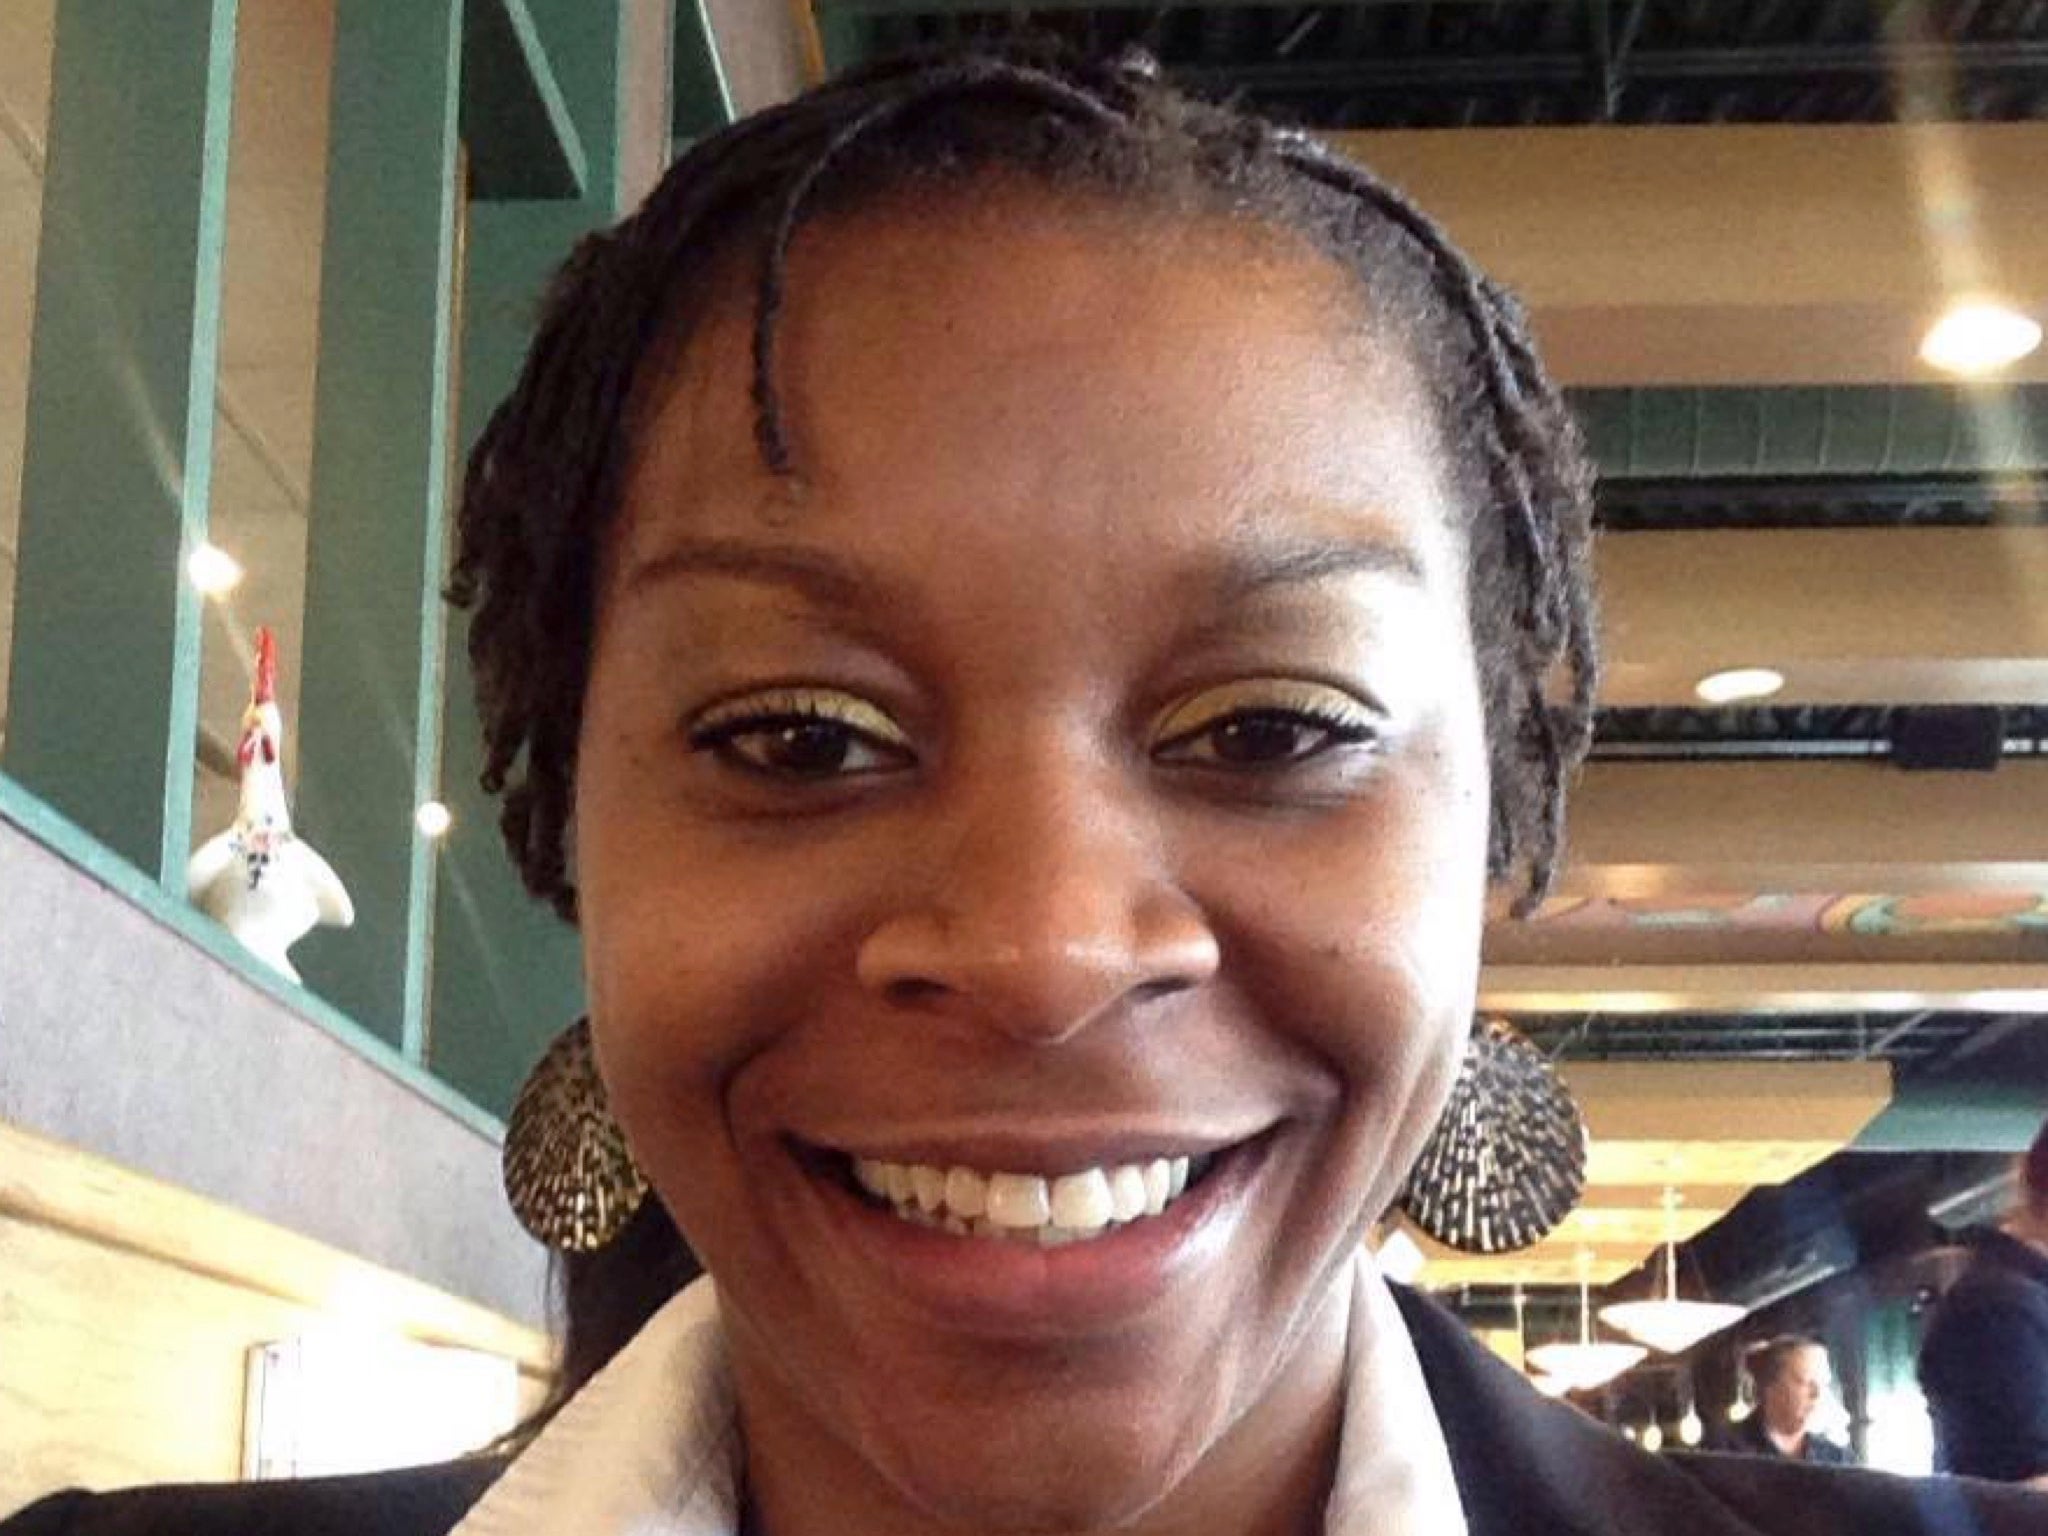 The family of Sandra Bland has demanded a probe into her death